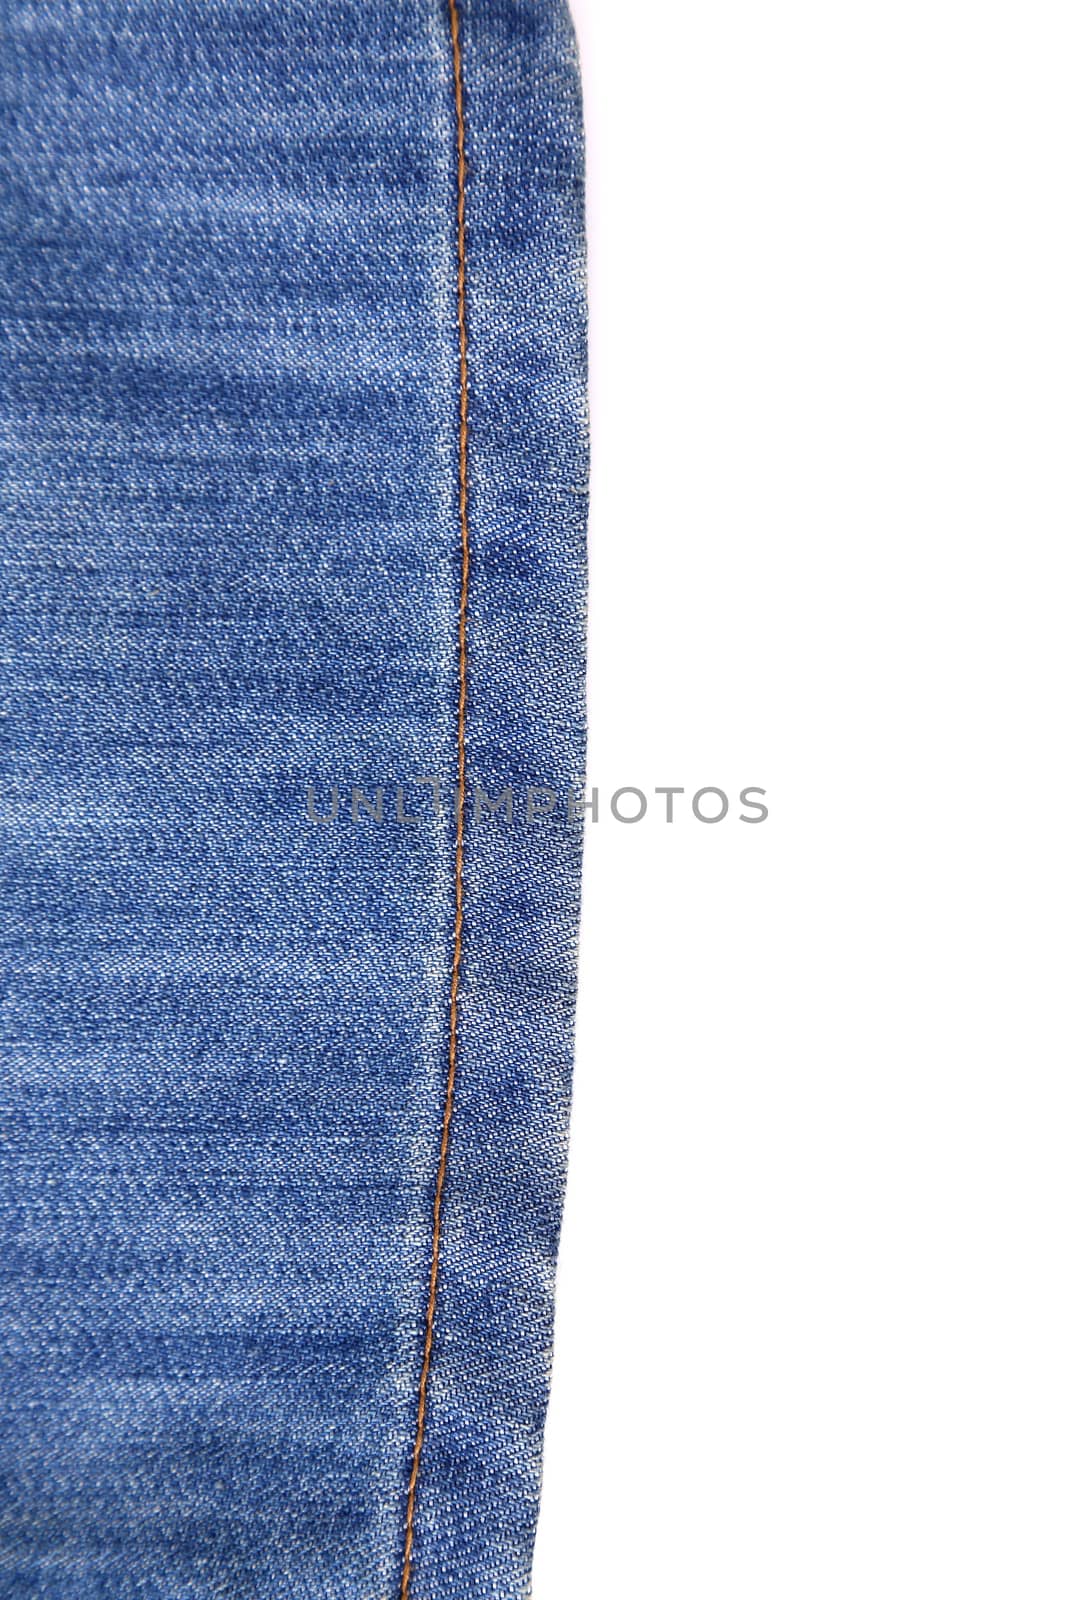 Wrinkled buttom leg of blue jean on the white background